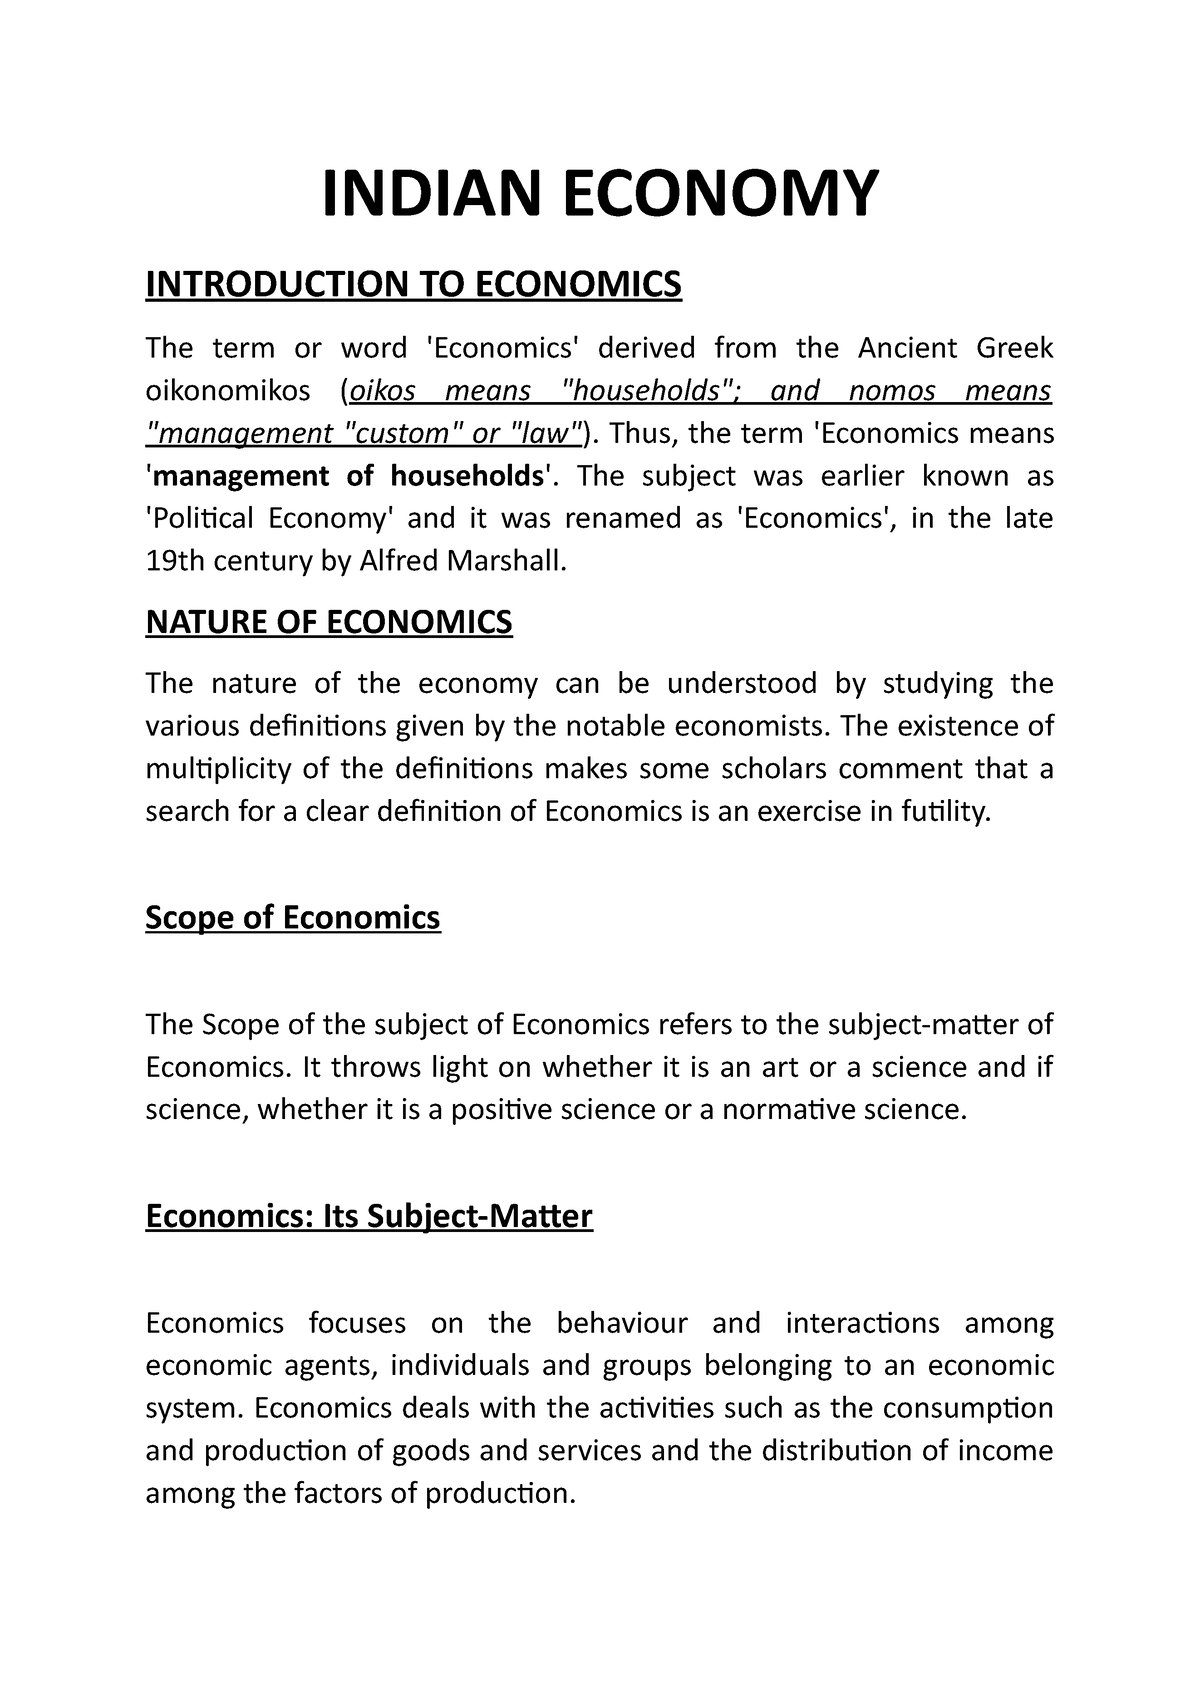 research paper about indian economy